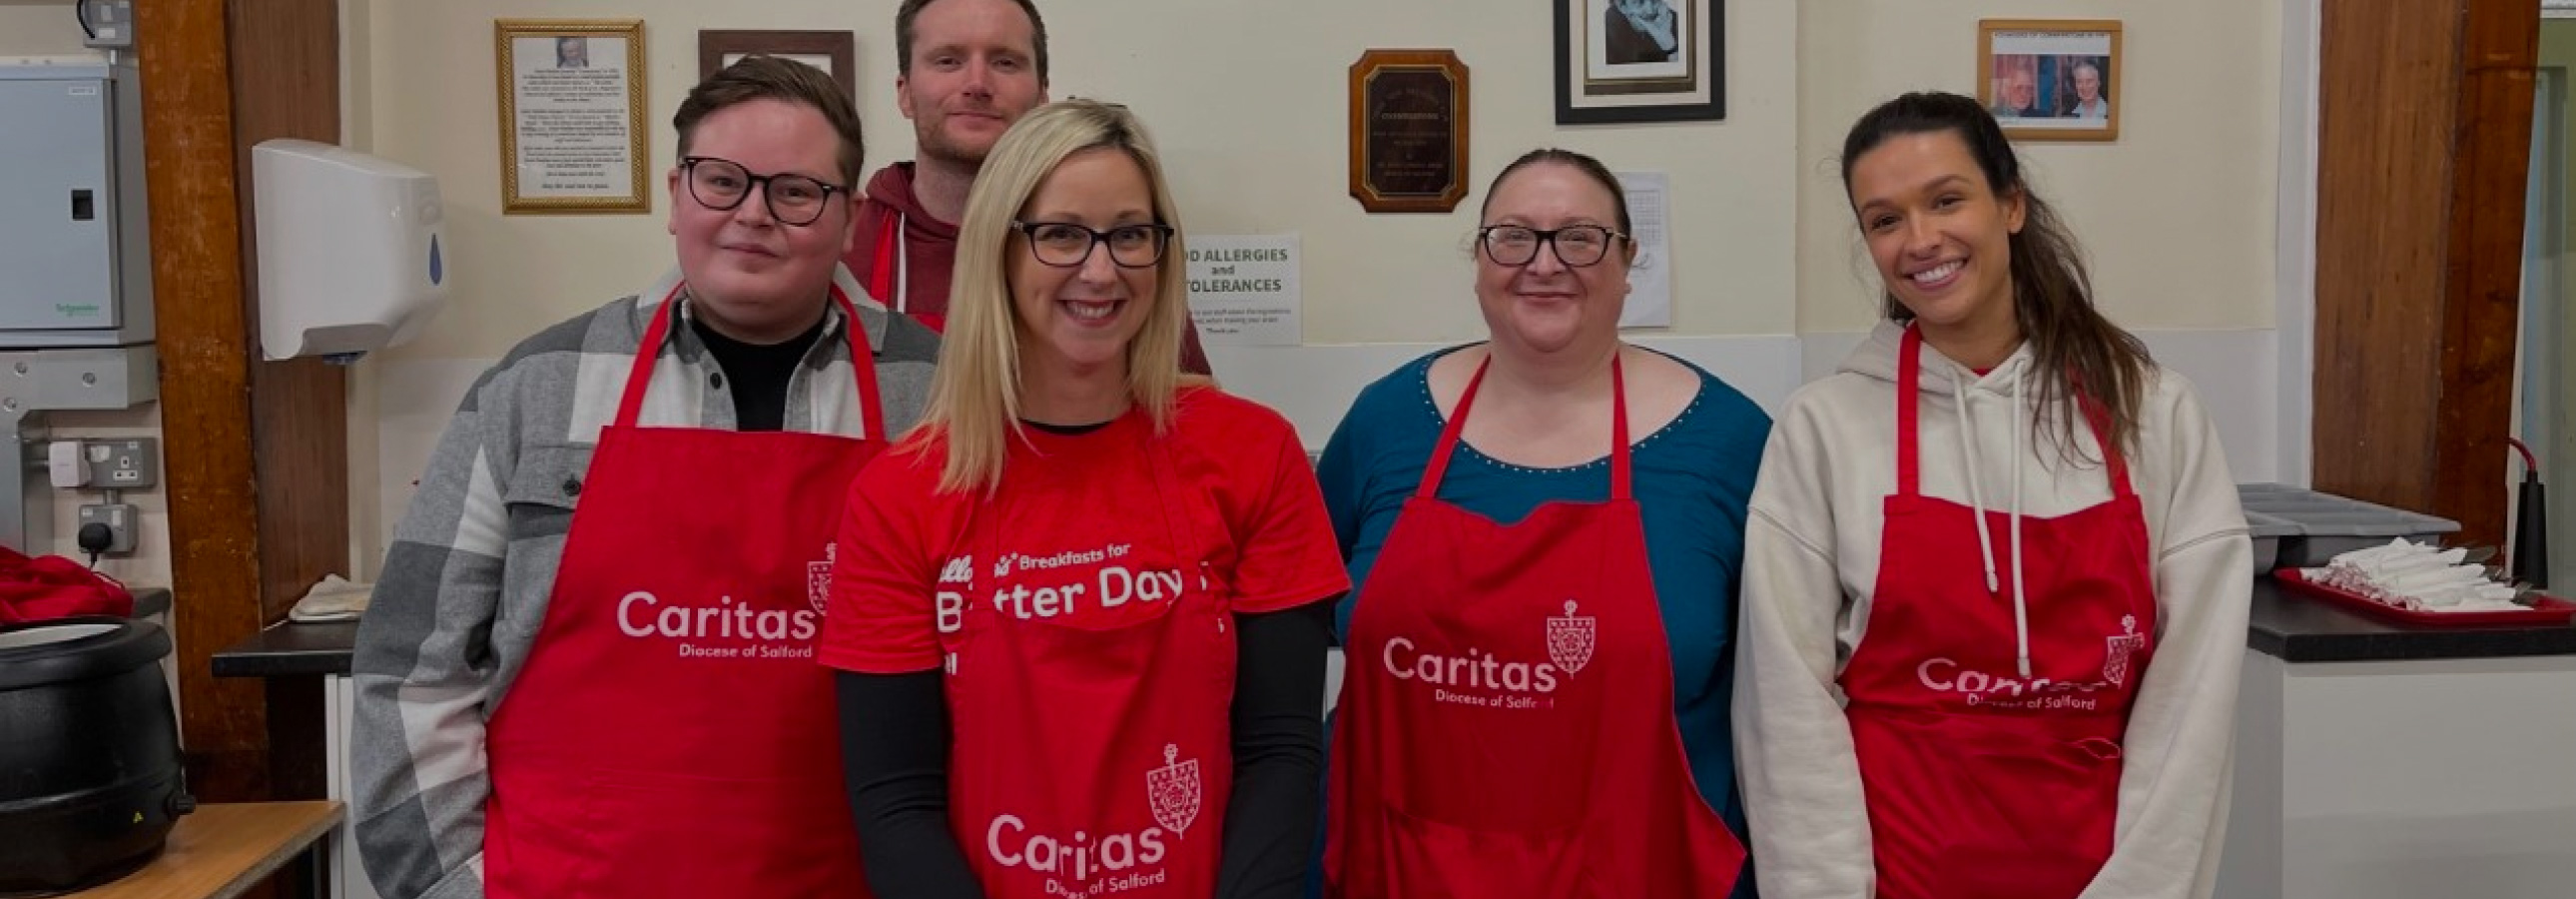 Group-of-corporate-volunteers-in-line-smiling-at-camera-all-wearing-red-caritas-aprons